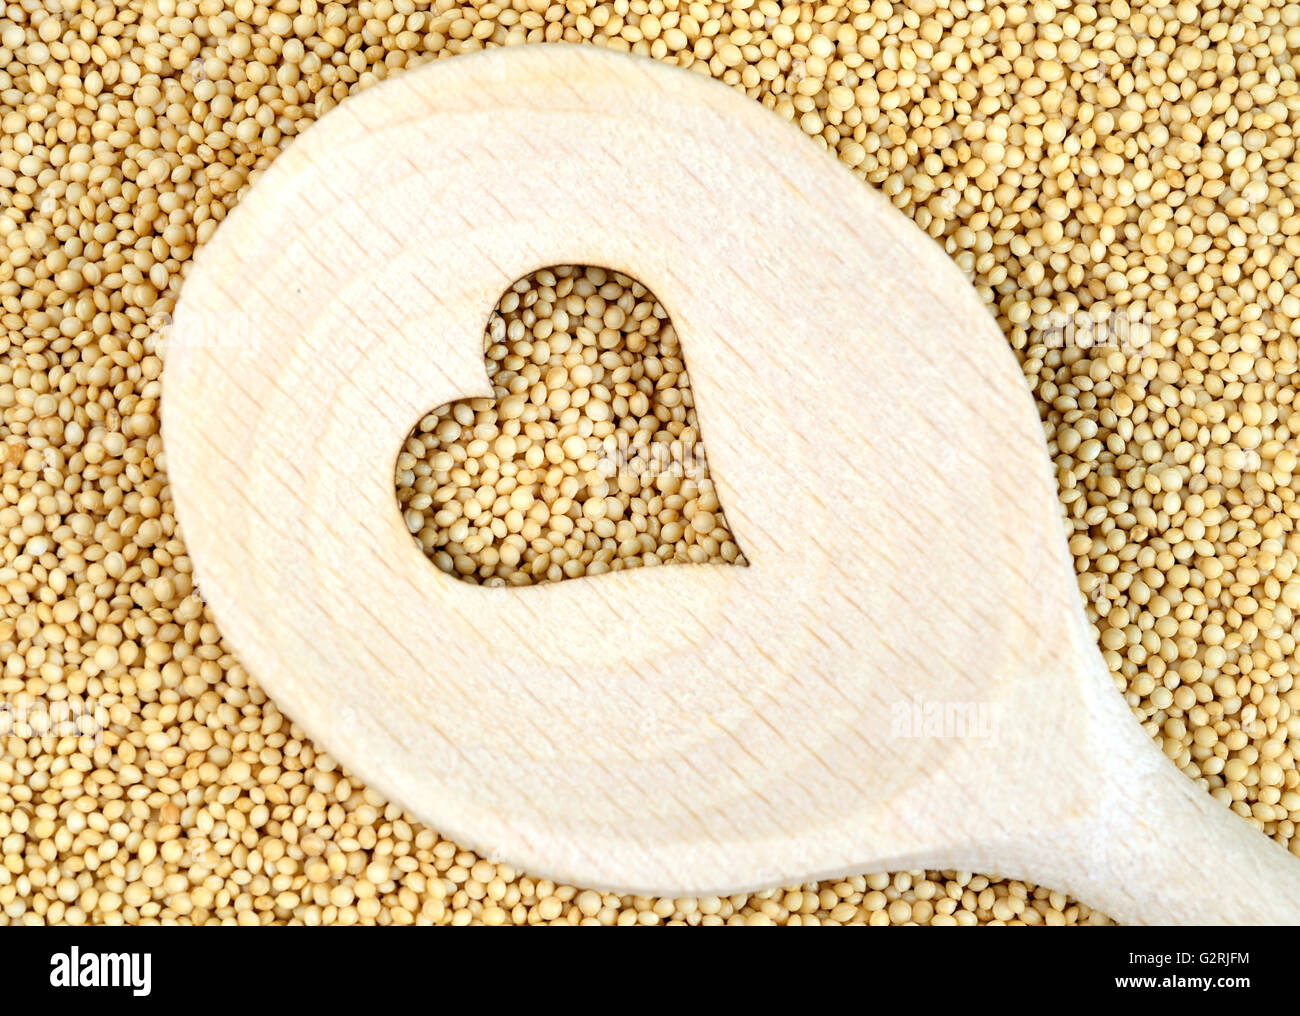 Wooden spoon with heart shape cutted on amaranth seeds Stock Photo